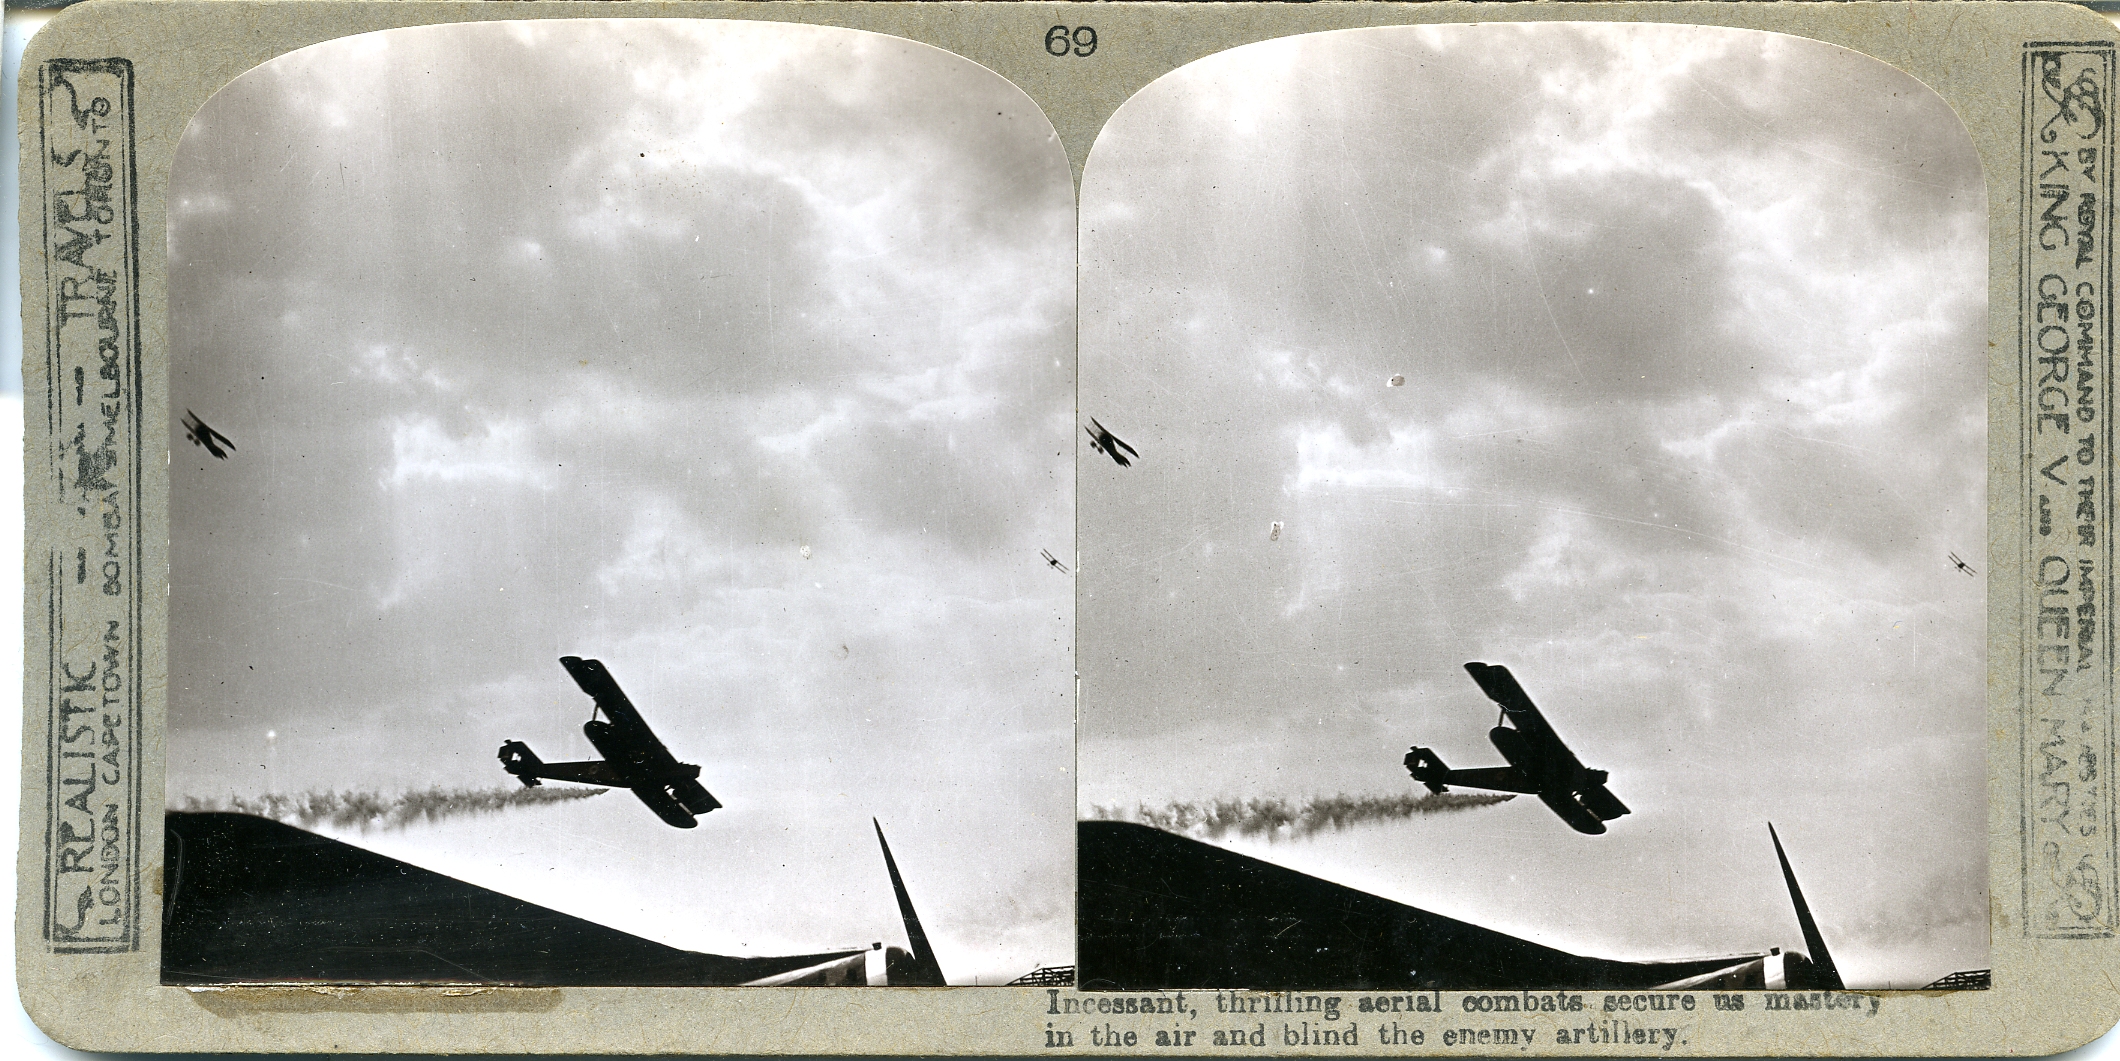 Incessant & thrilling aerial combats secure us mastery of the air & blind the enemy artillery